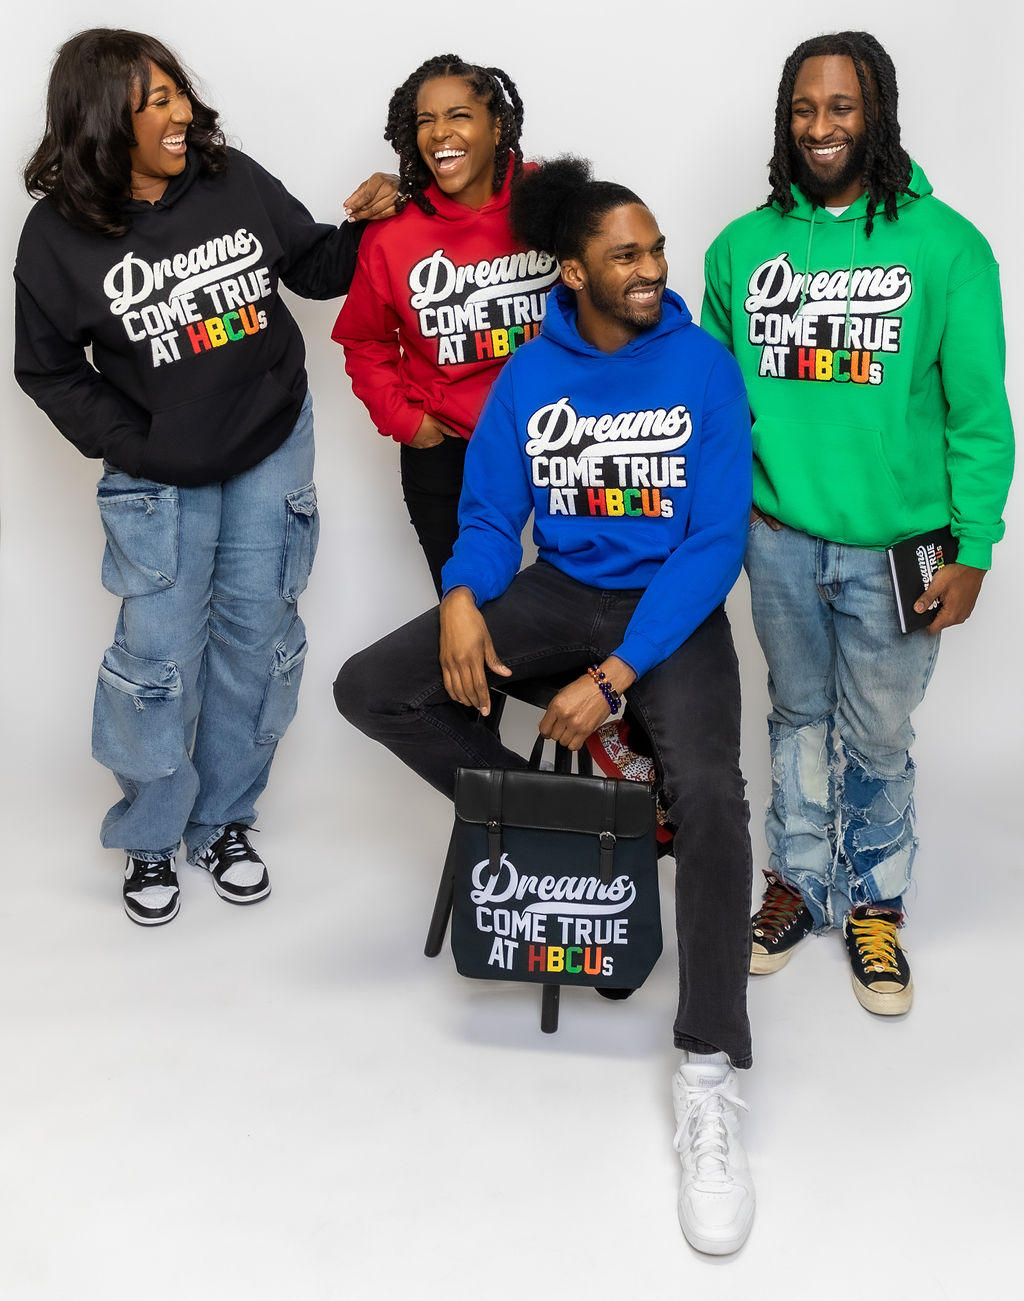 HBCU Clothing and Apparel